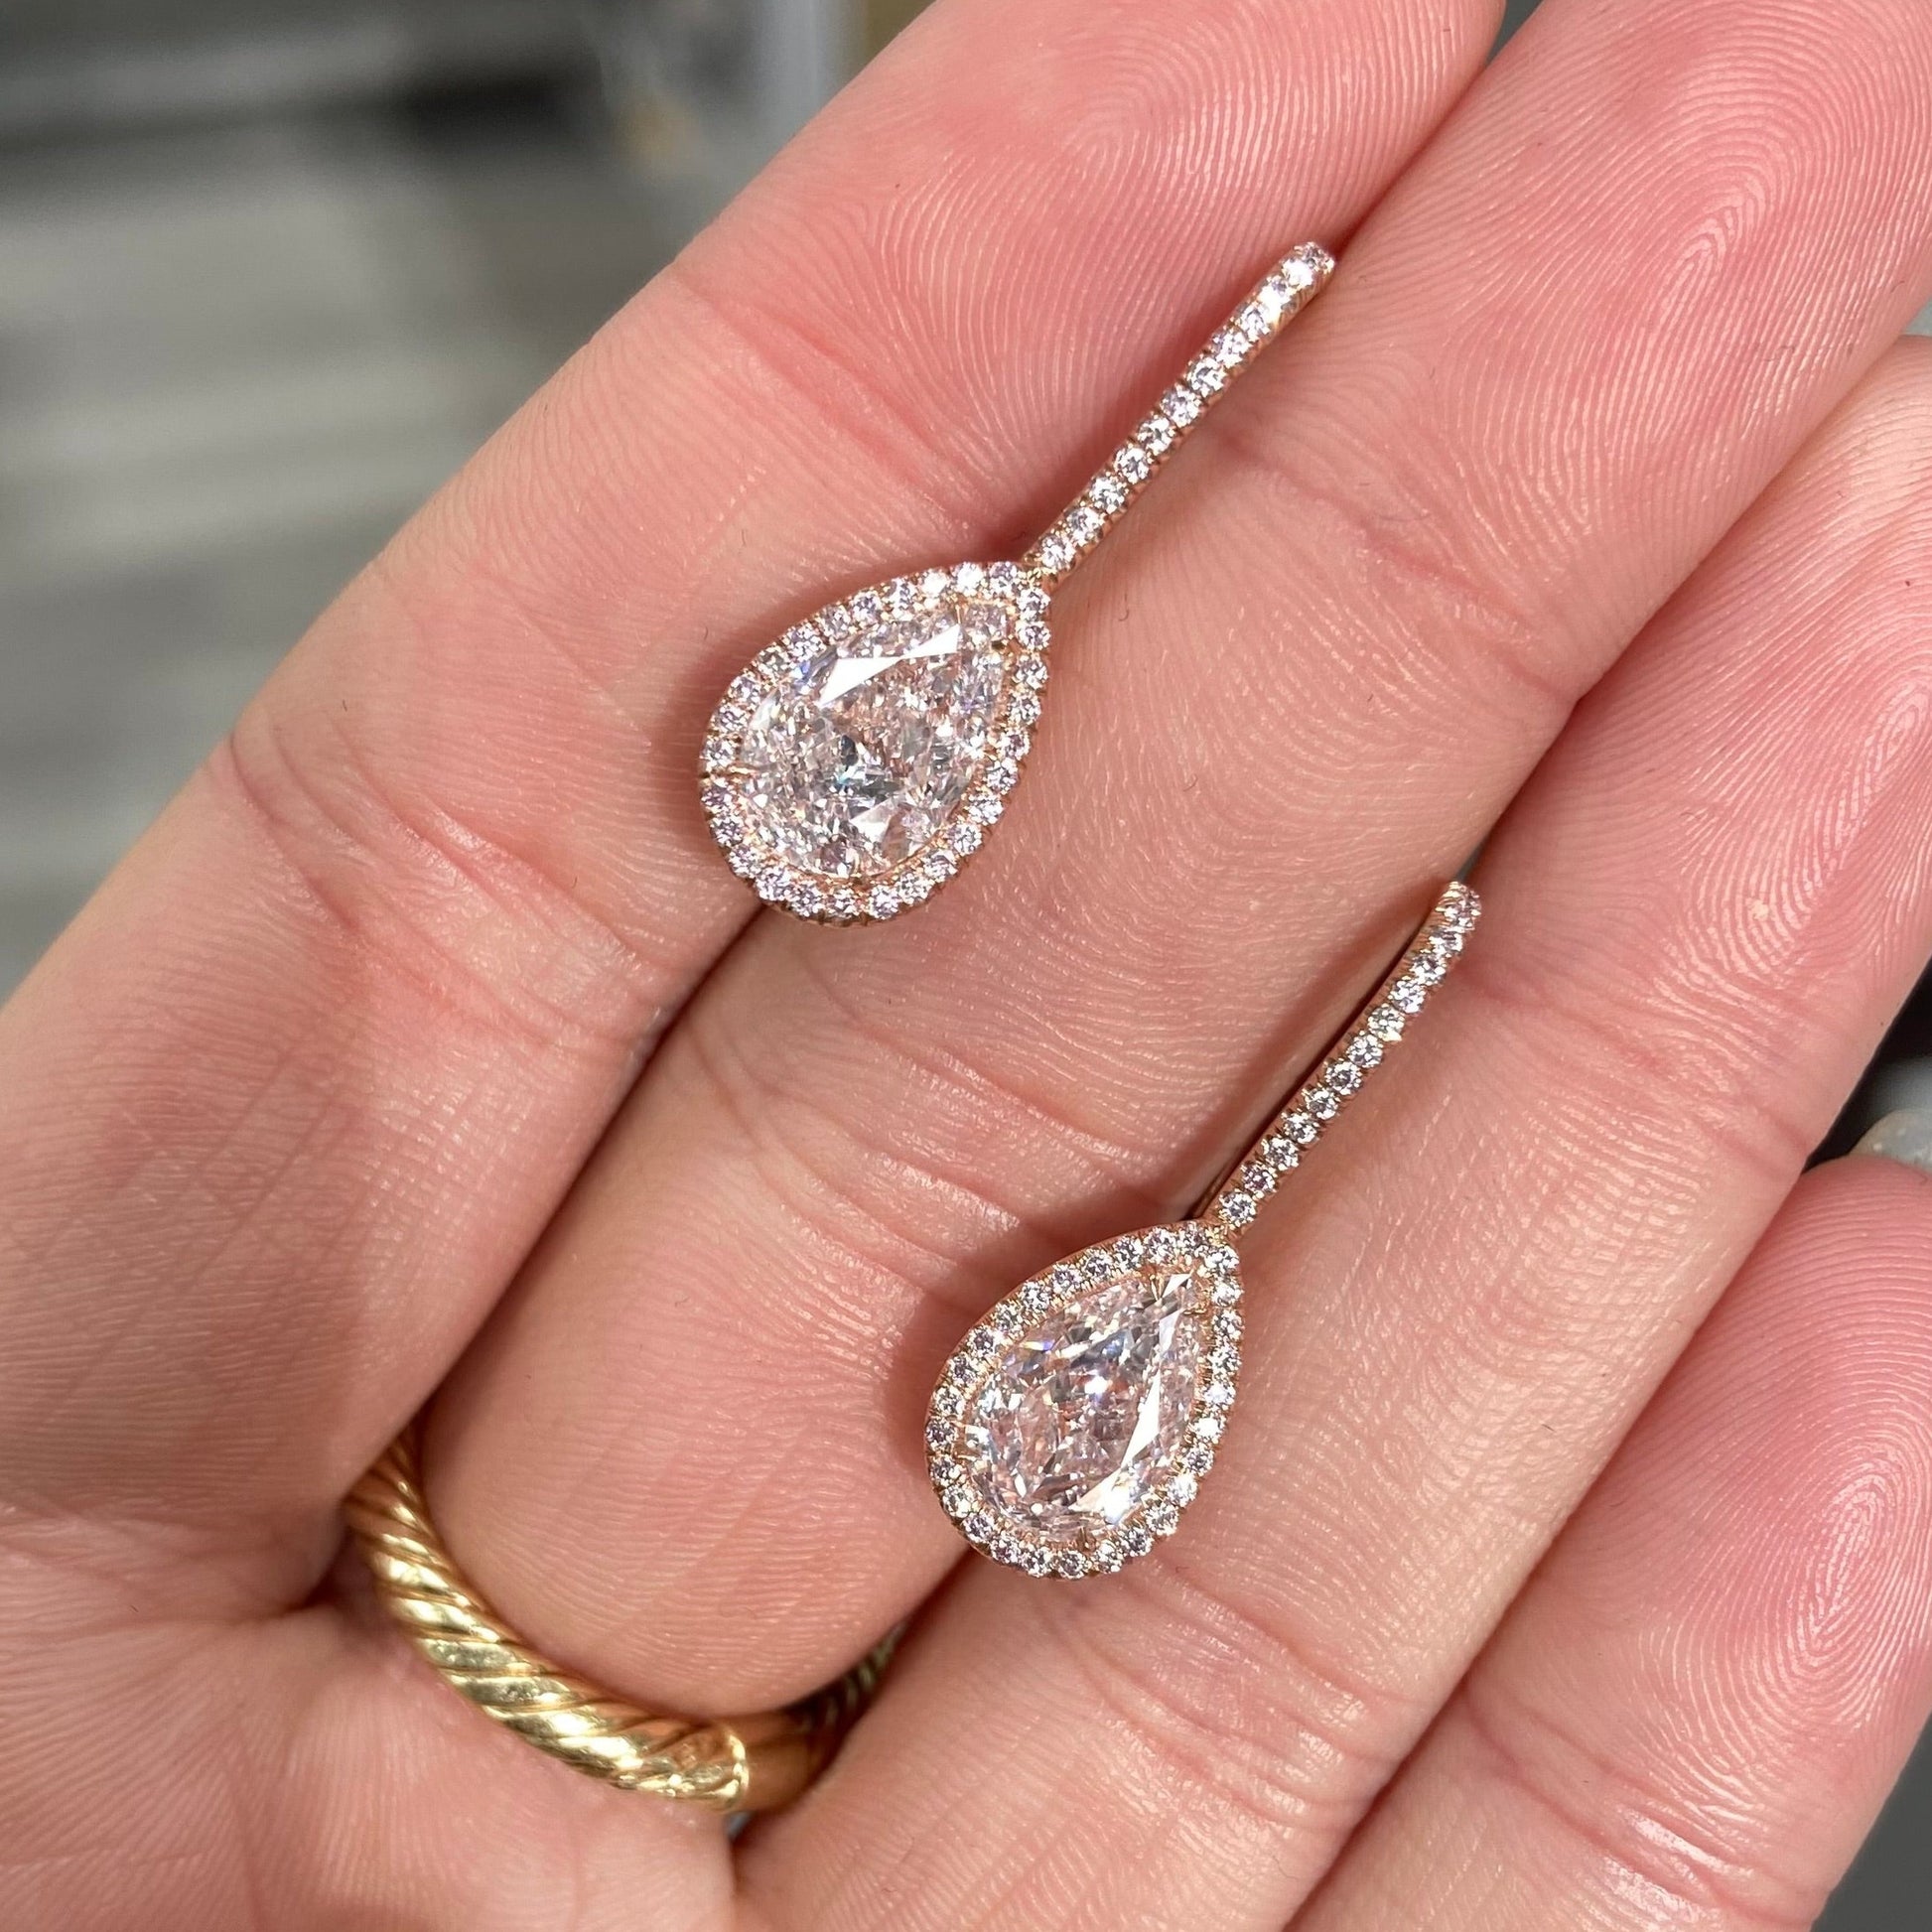 Handmade rose gold earrings featuring a rare matched pair of 2 carat each light pink pear shape diamonds and round pink diamonds